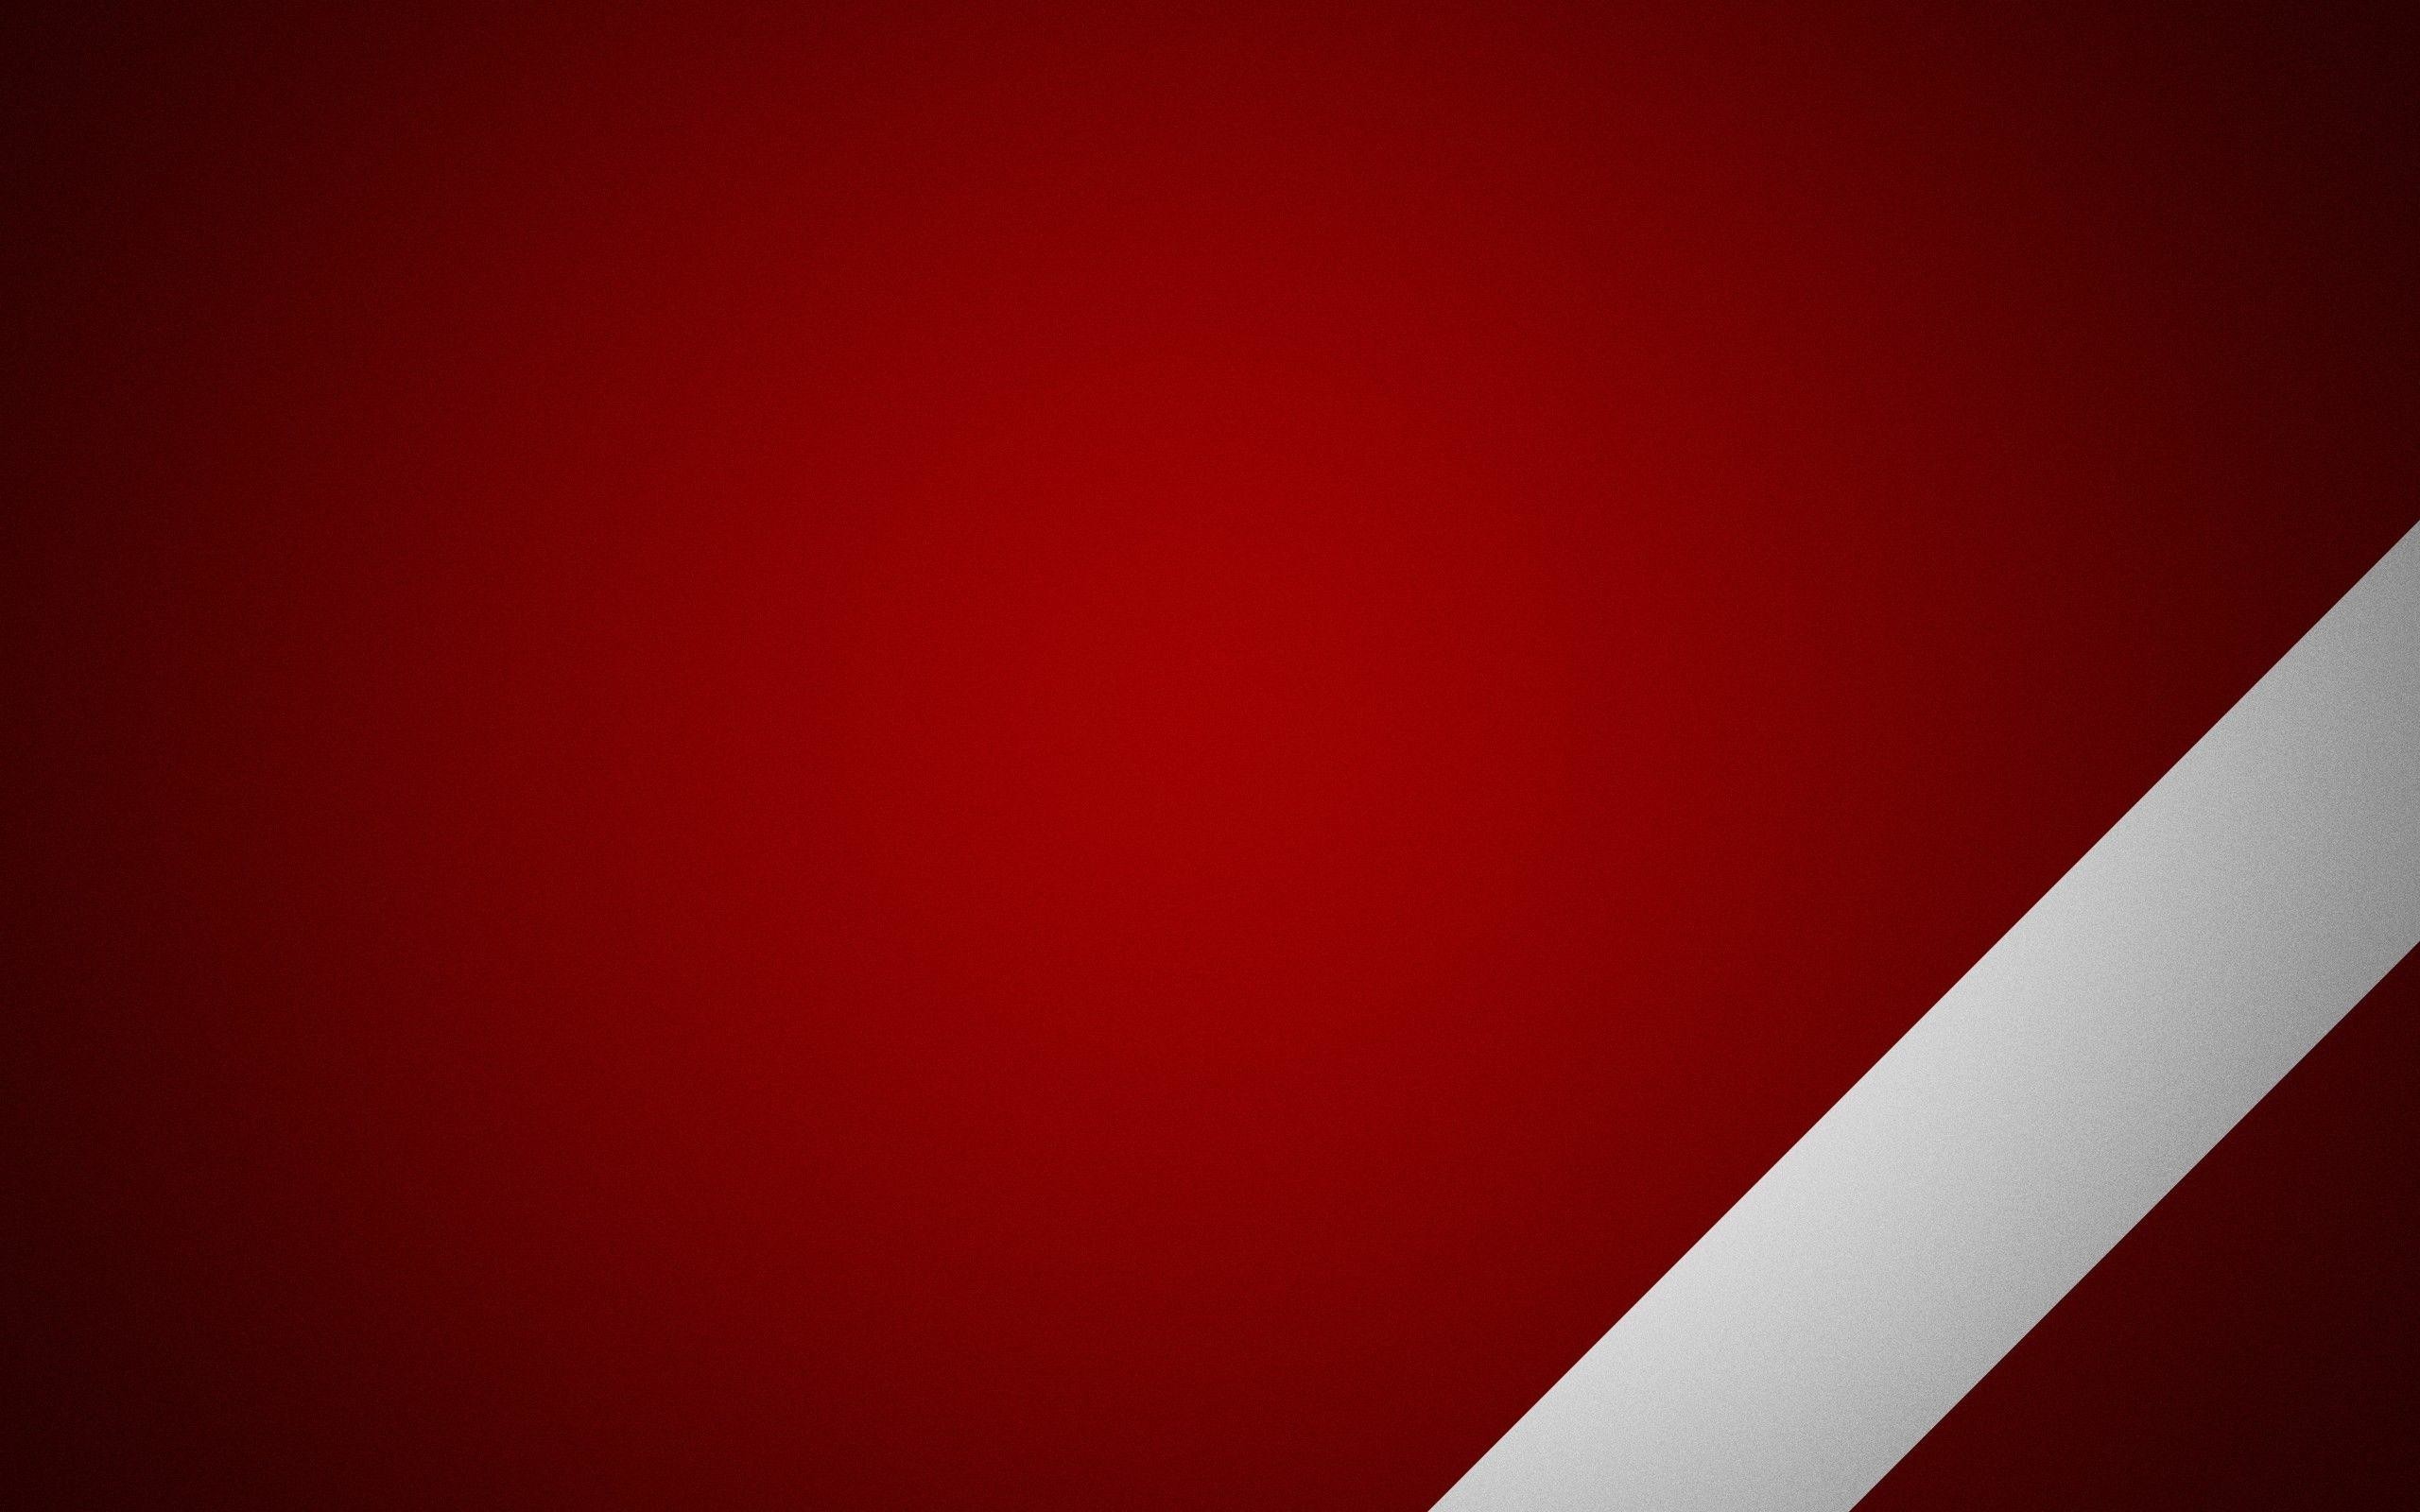 2560x1600 Wallpapers For > Red White And Blue Striped Wallpaper